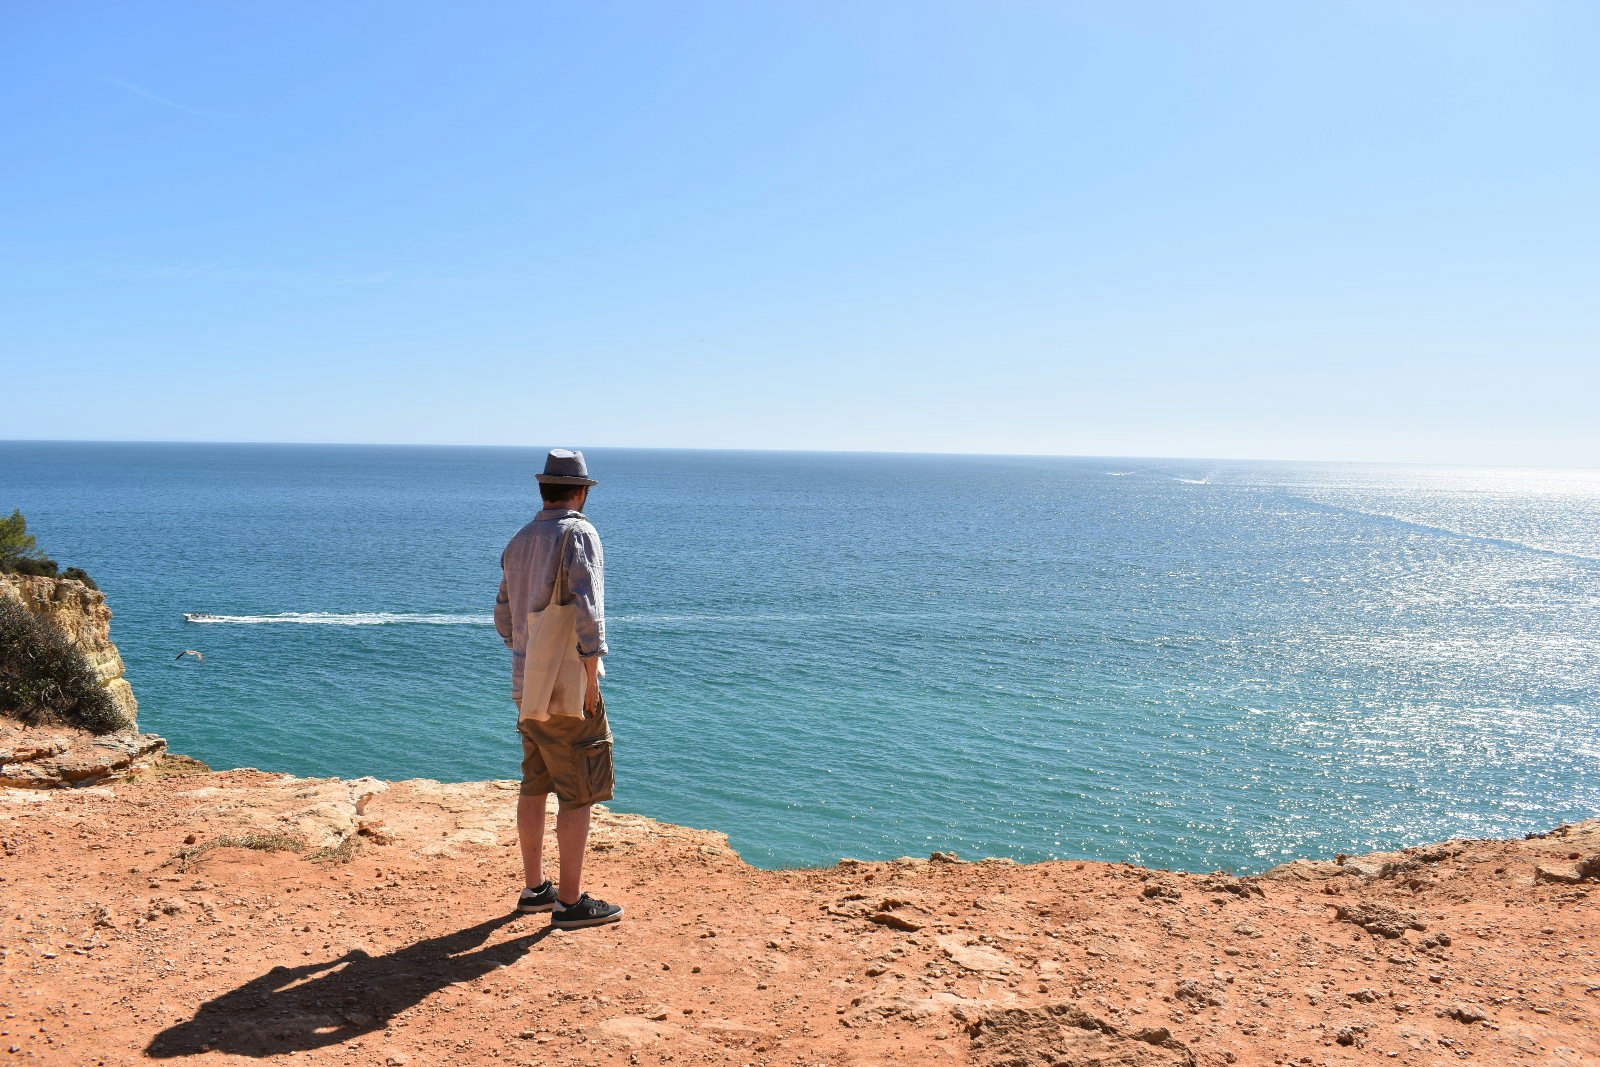 The author – wearing a shirt, shorts and hat and carrying a tote bag – looks out to a shimmering sea from a cliff the colour of burnt orange.